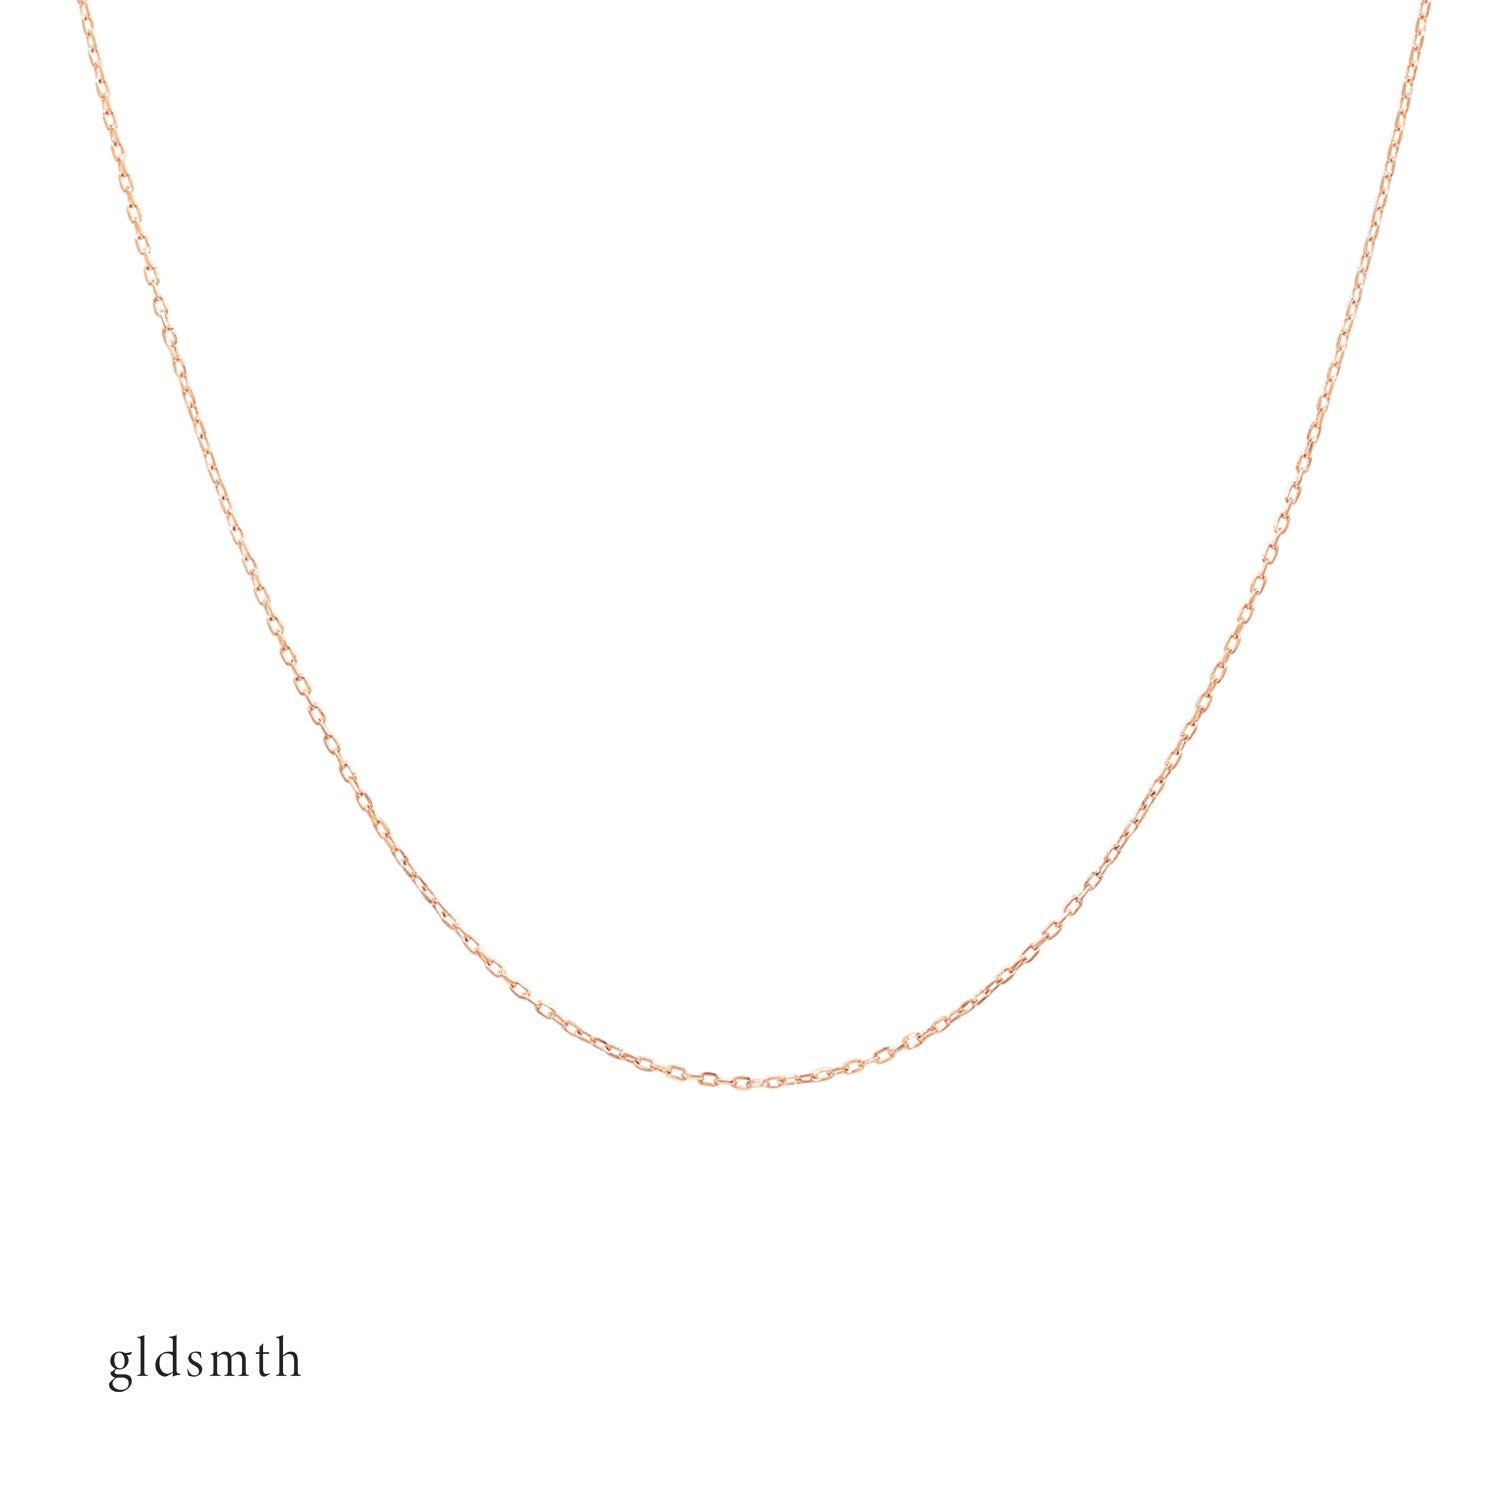 Elegant and minimalist necklace. Handcrafted 14k solid rose gold necklace chain